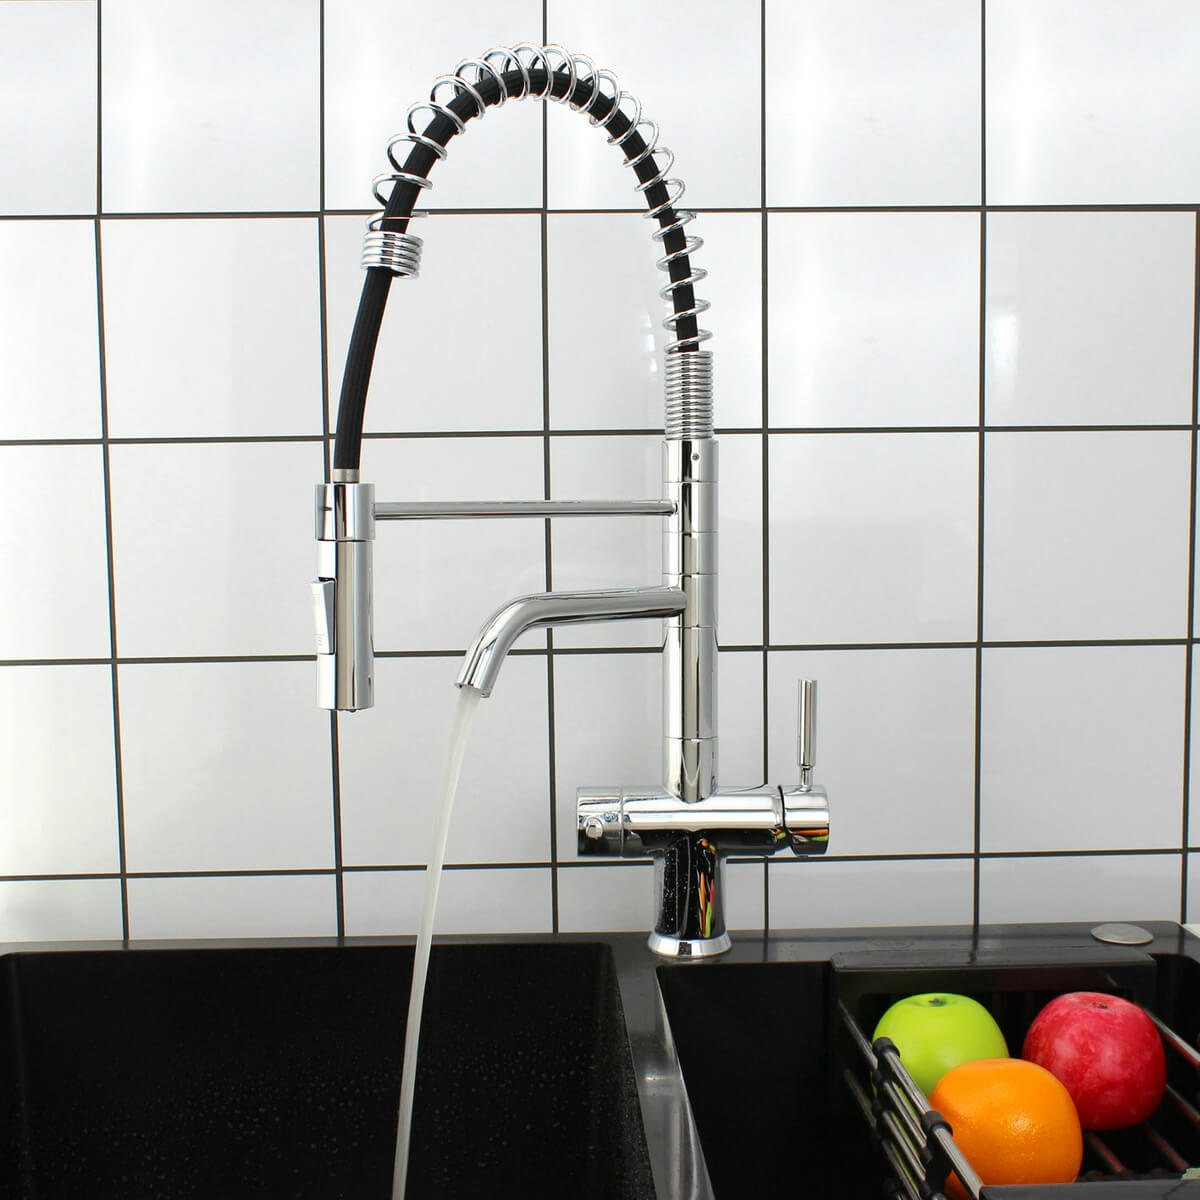 Pull down Pull Out <a href=https://www.dogofaucet.com/3-Way-Kitchen-Tap.html target='_blank'>3 way tap</a>